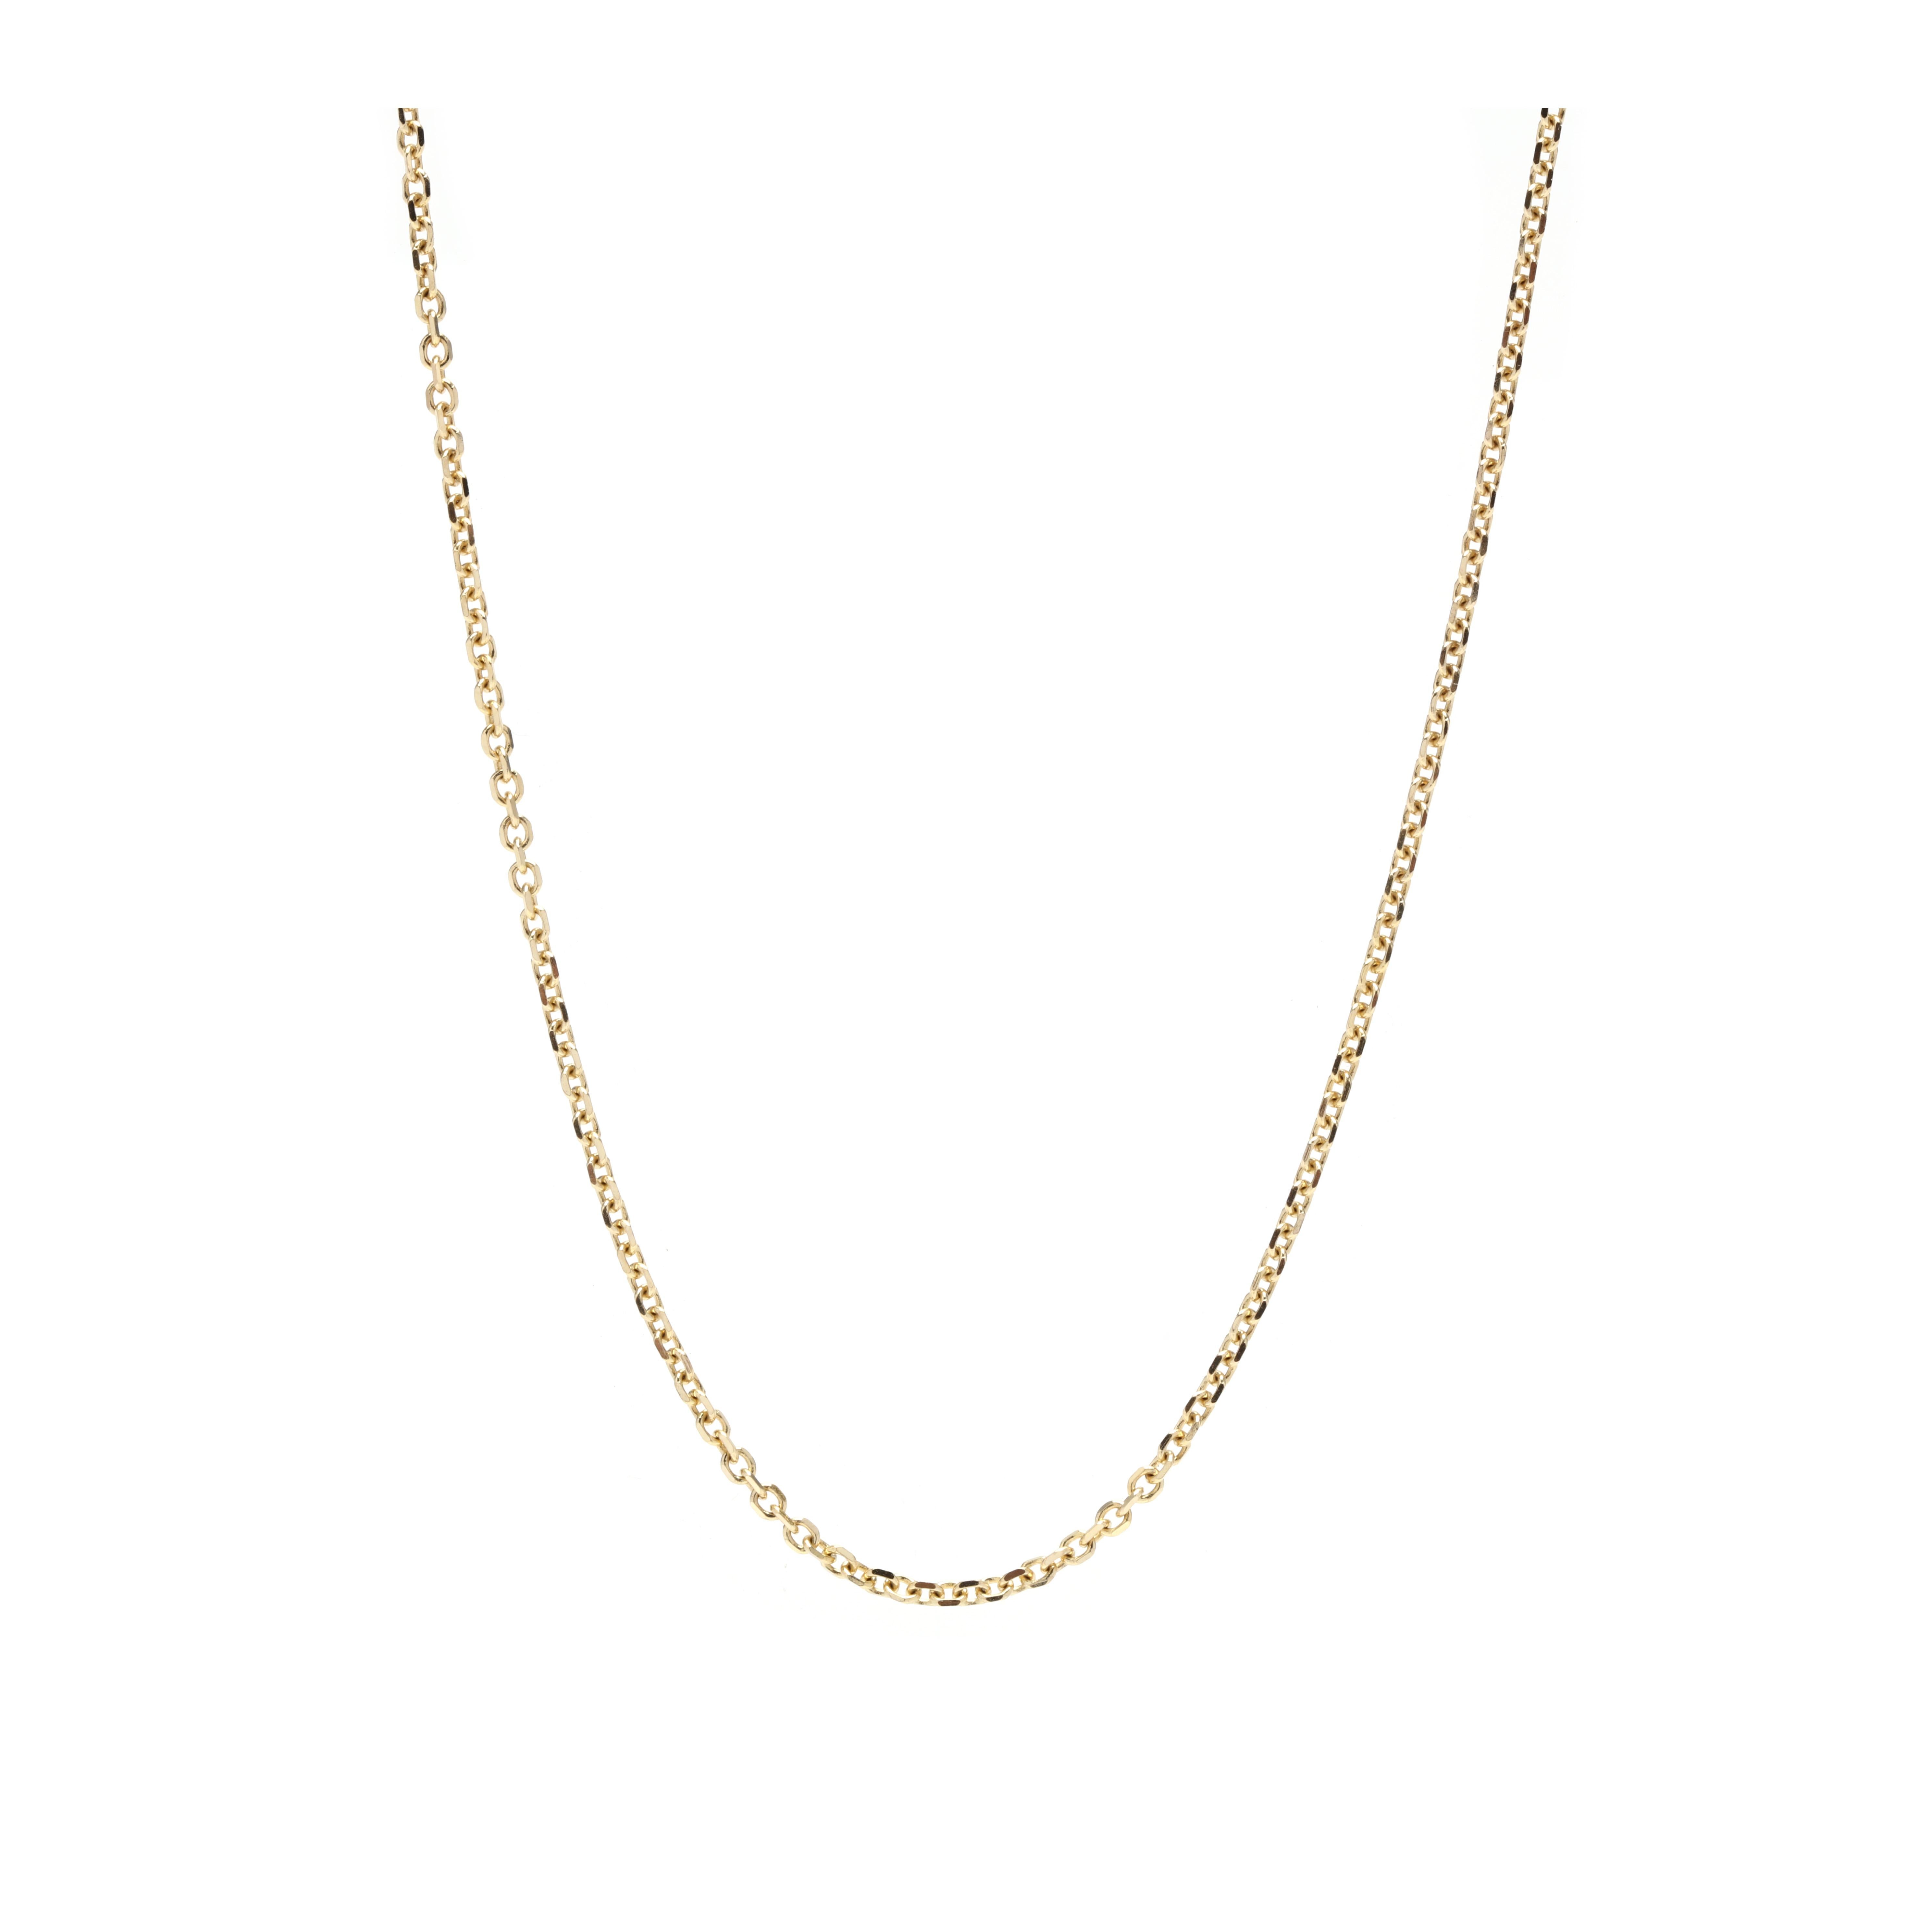 Women's or Men's Long Solid Gold Cable Chain, 14K Yellow Gold, Length 22 Inches, Long Simple For Sale